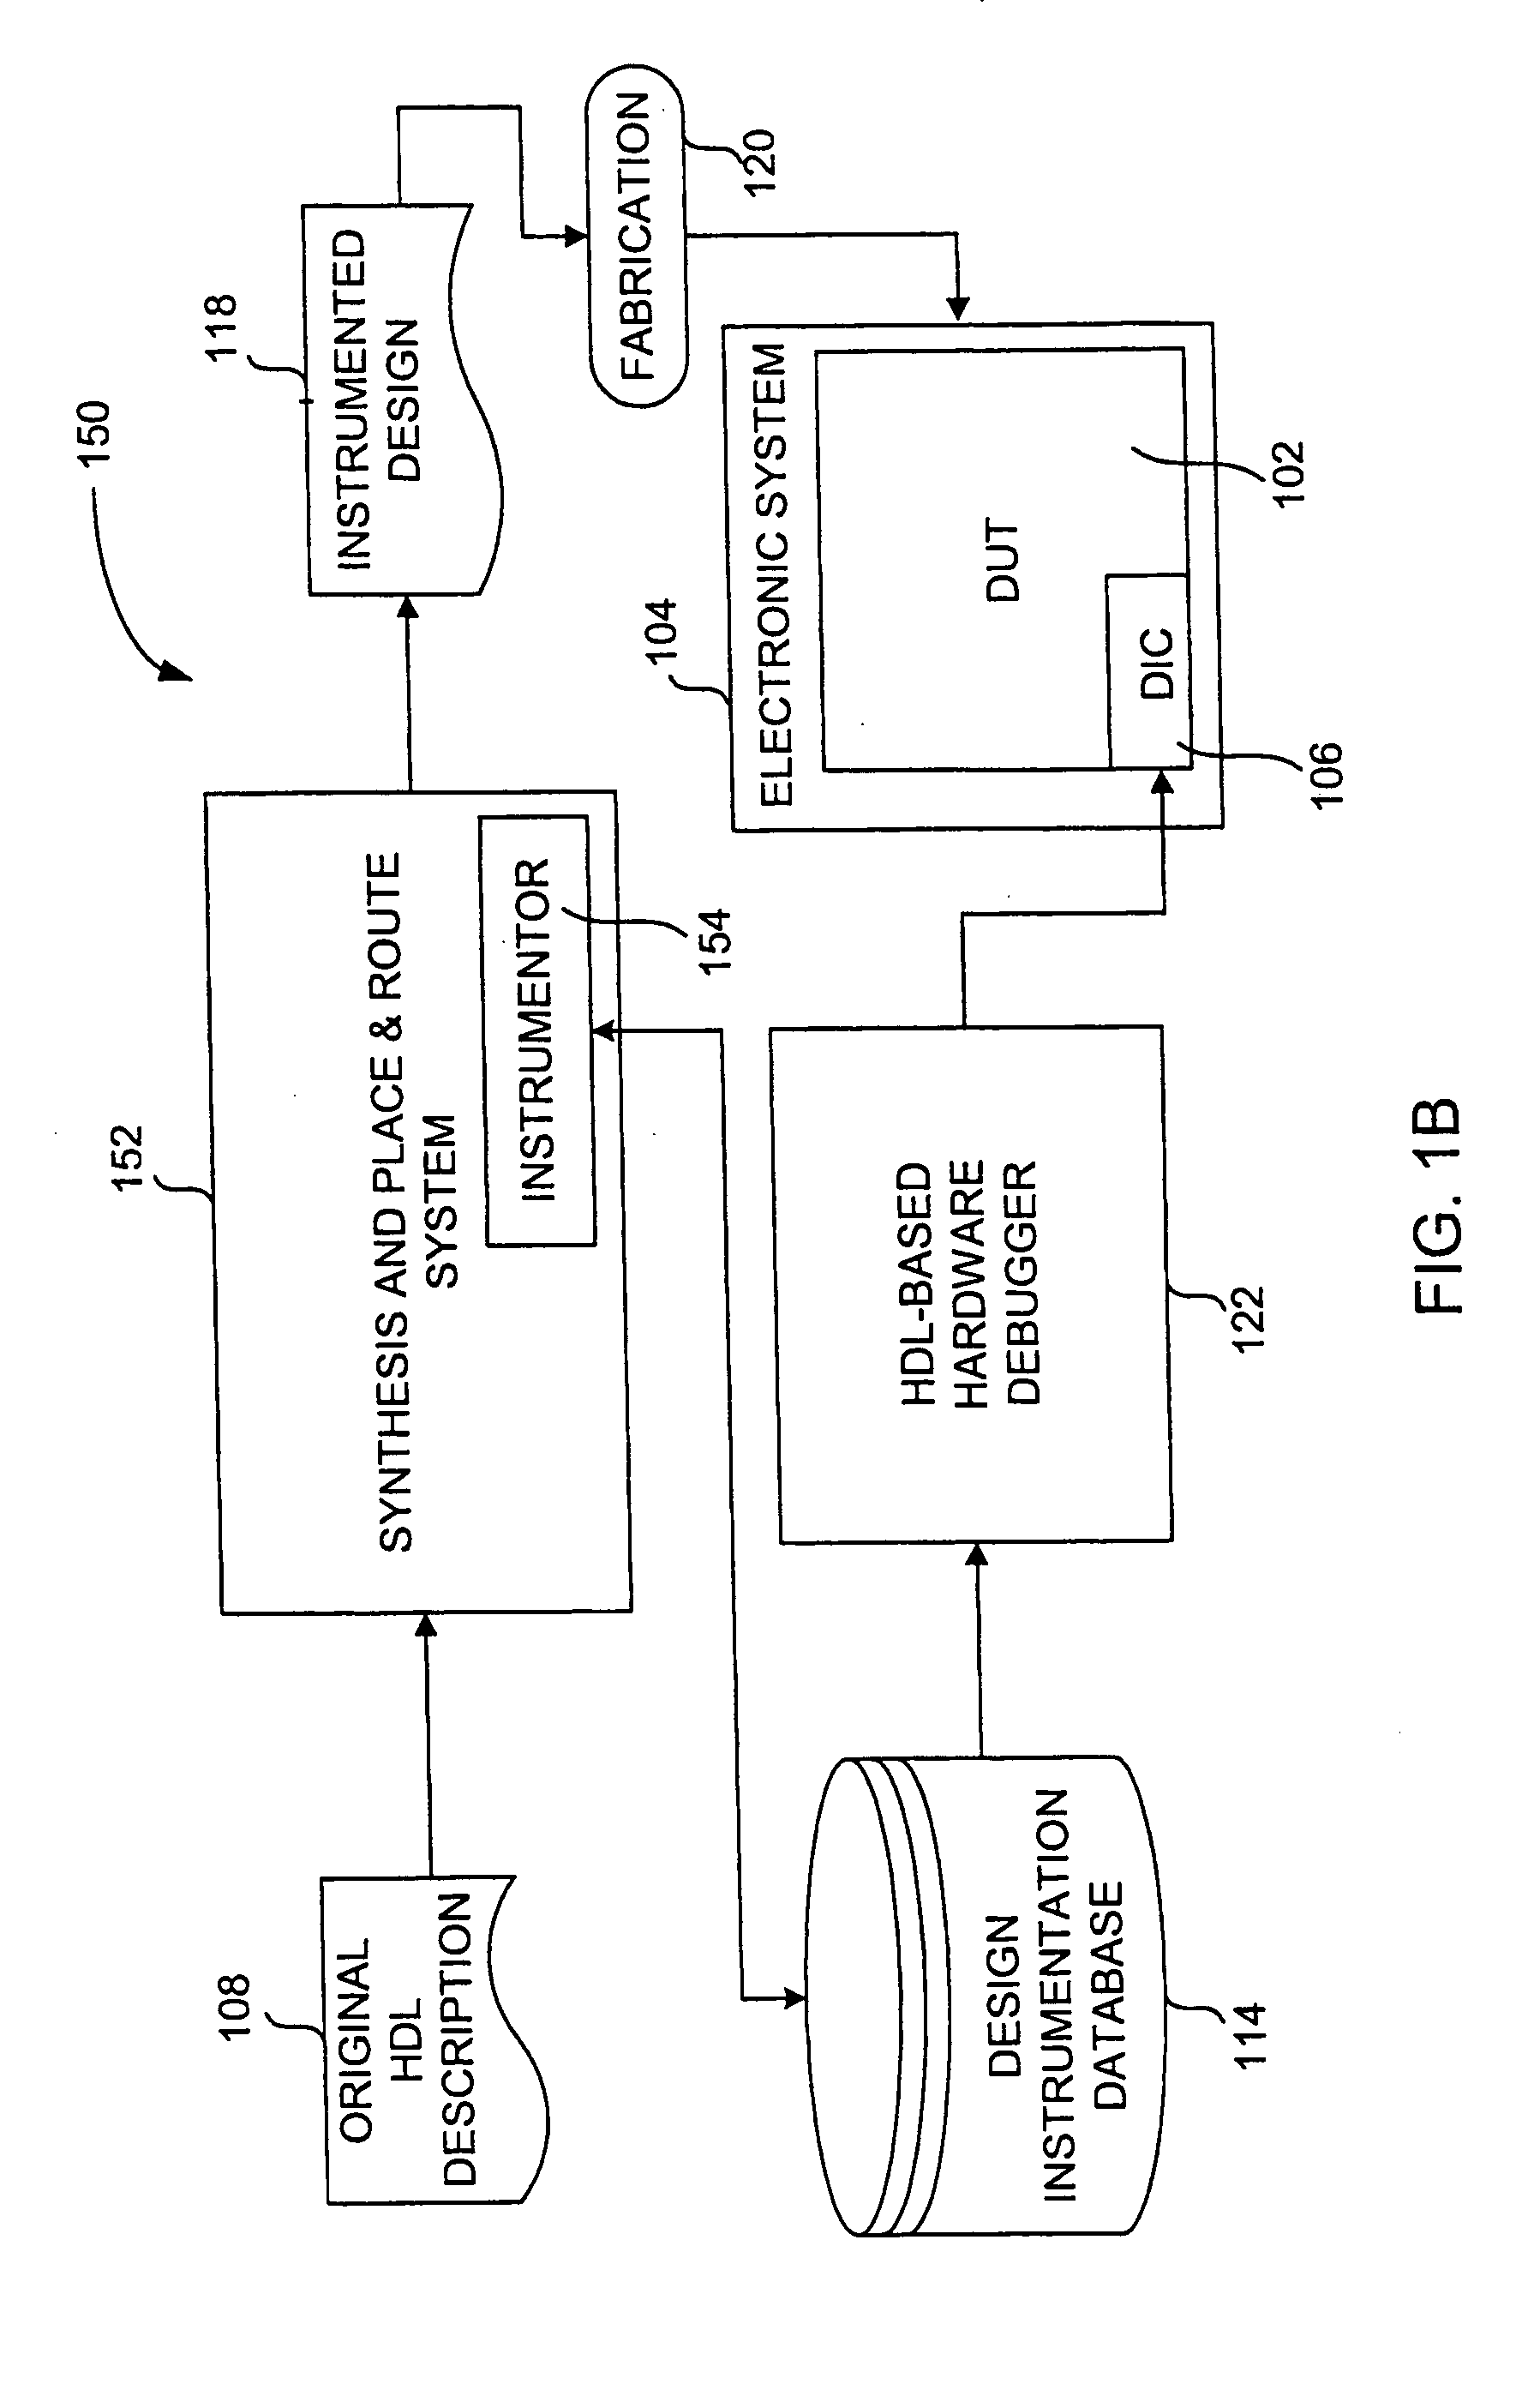 Method and user interface for debugging an electronic system